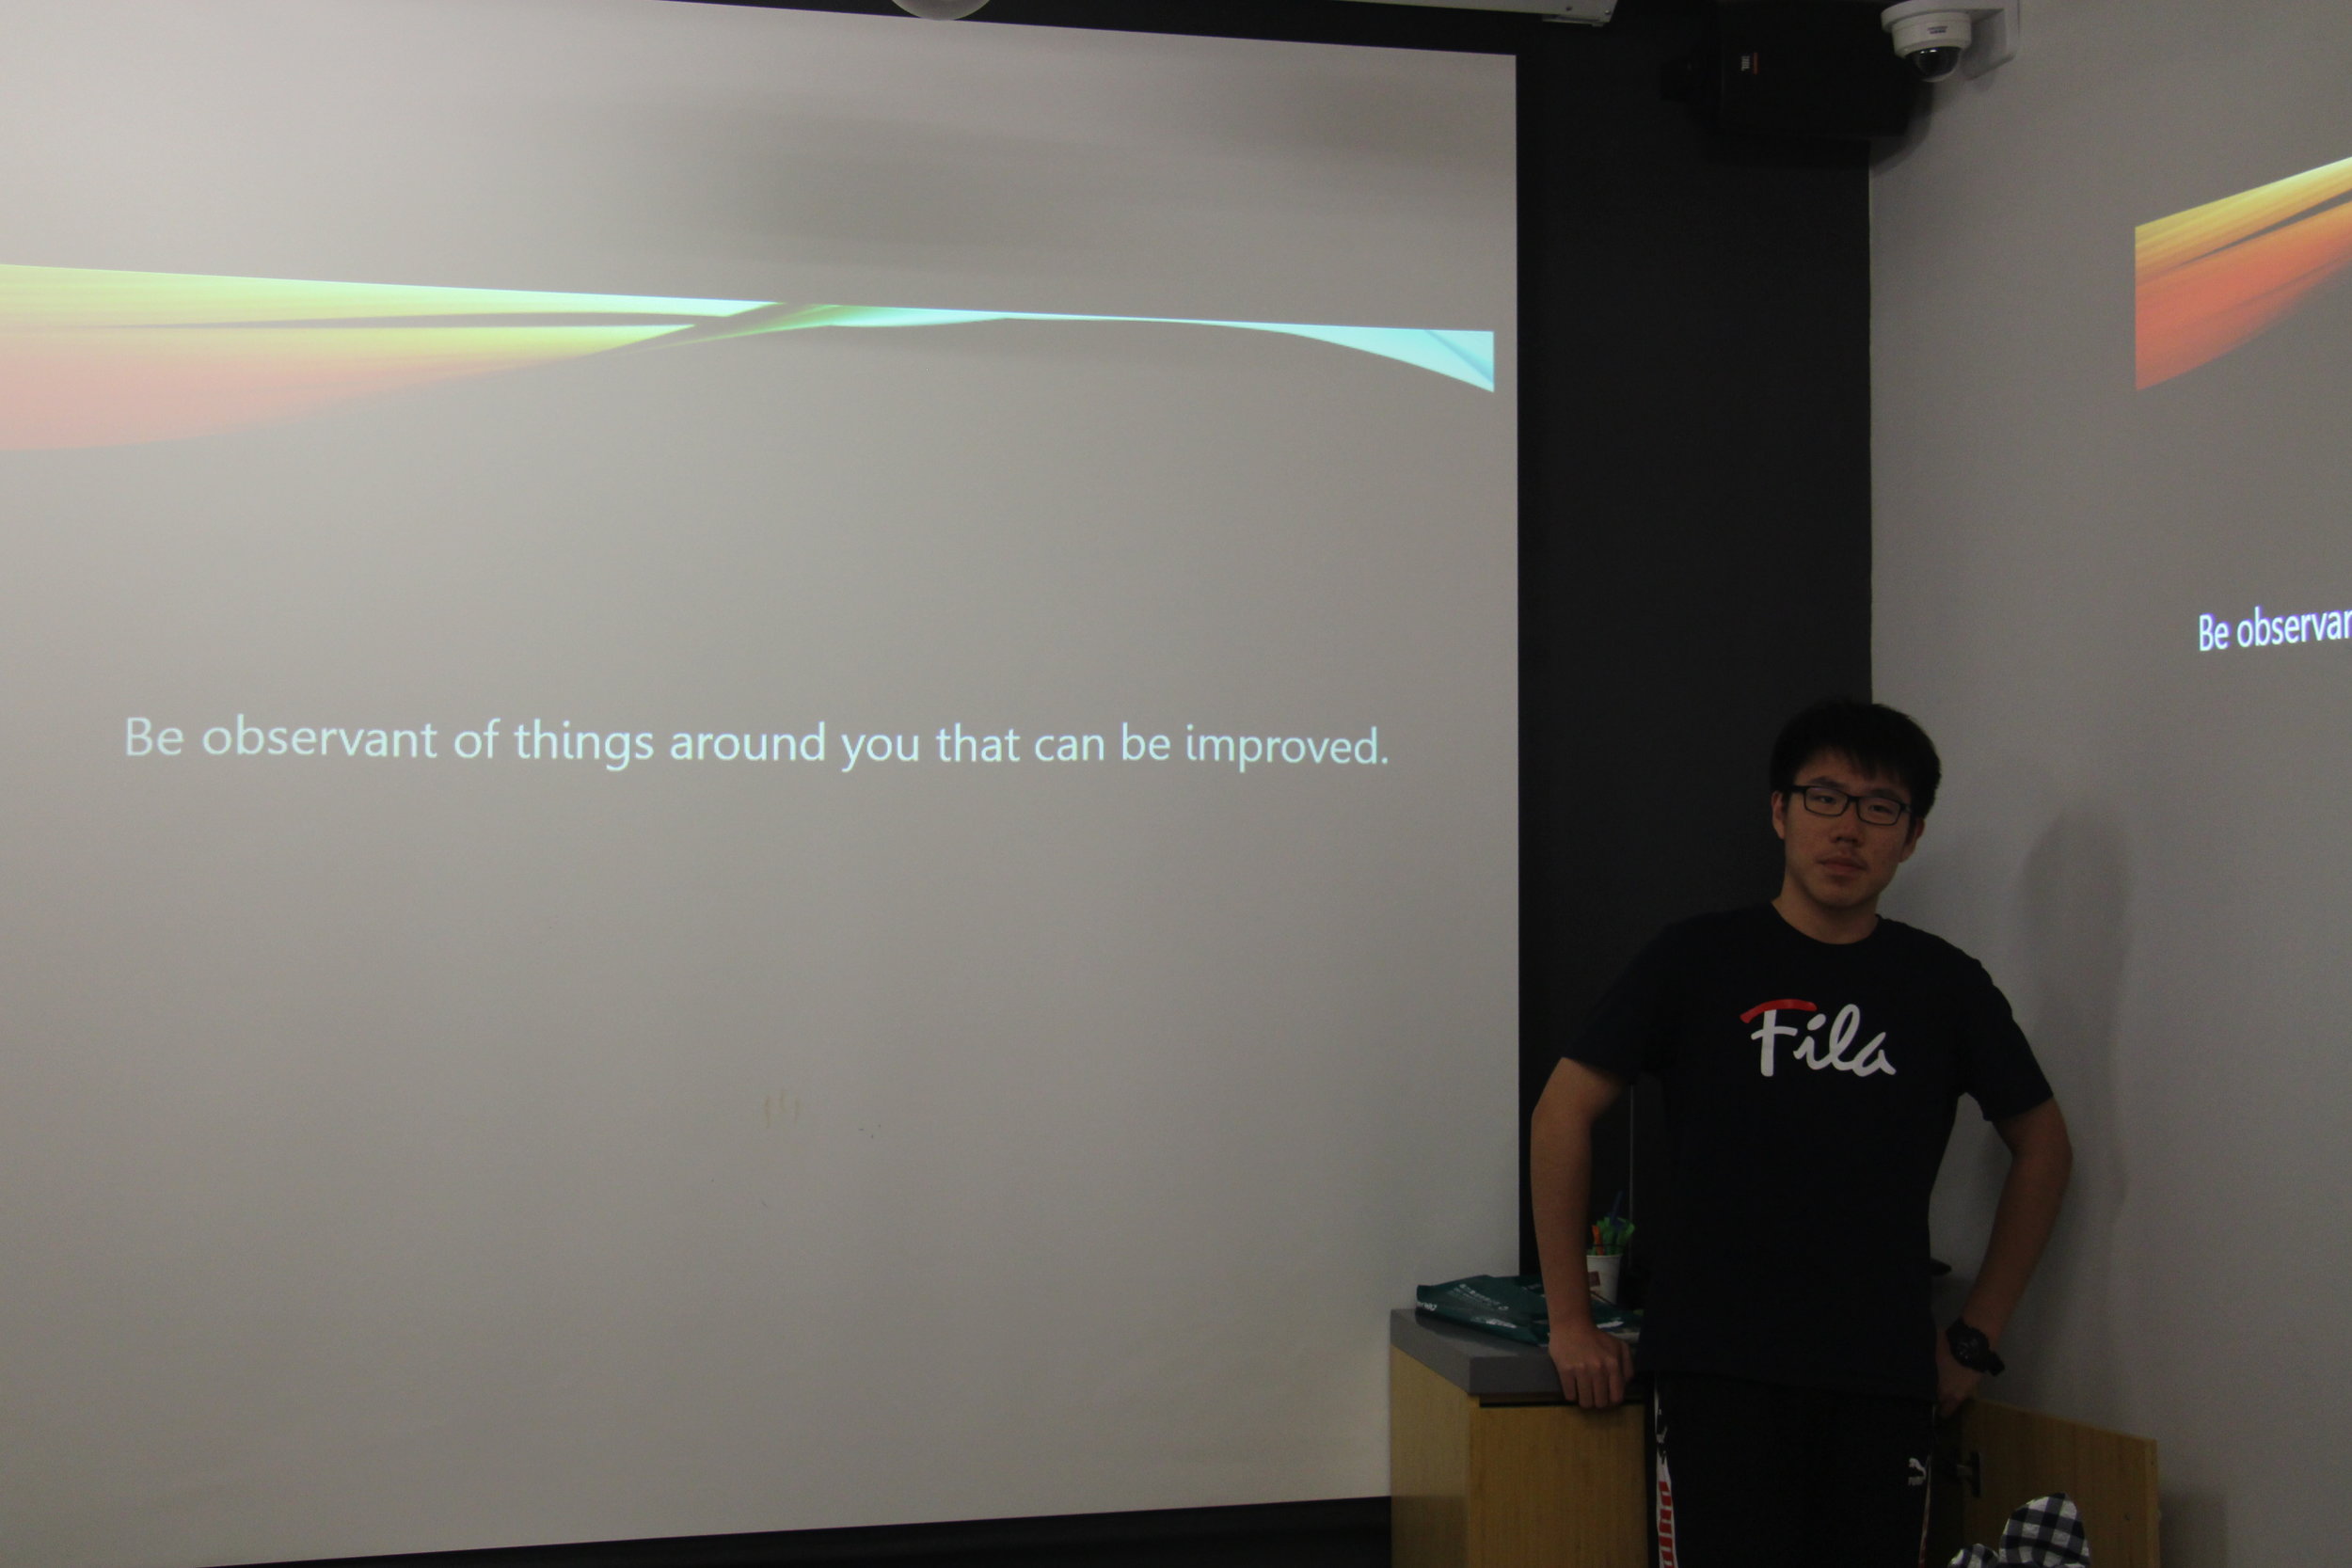  Xiao discusses how to start a project. 